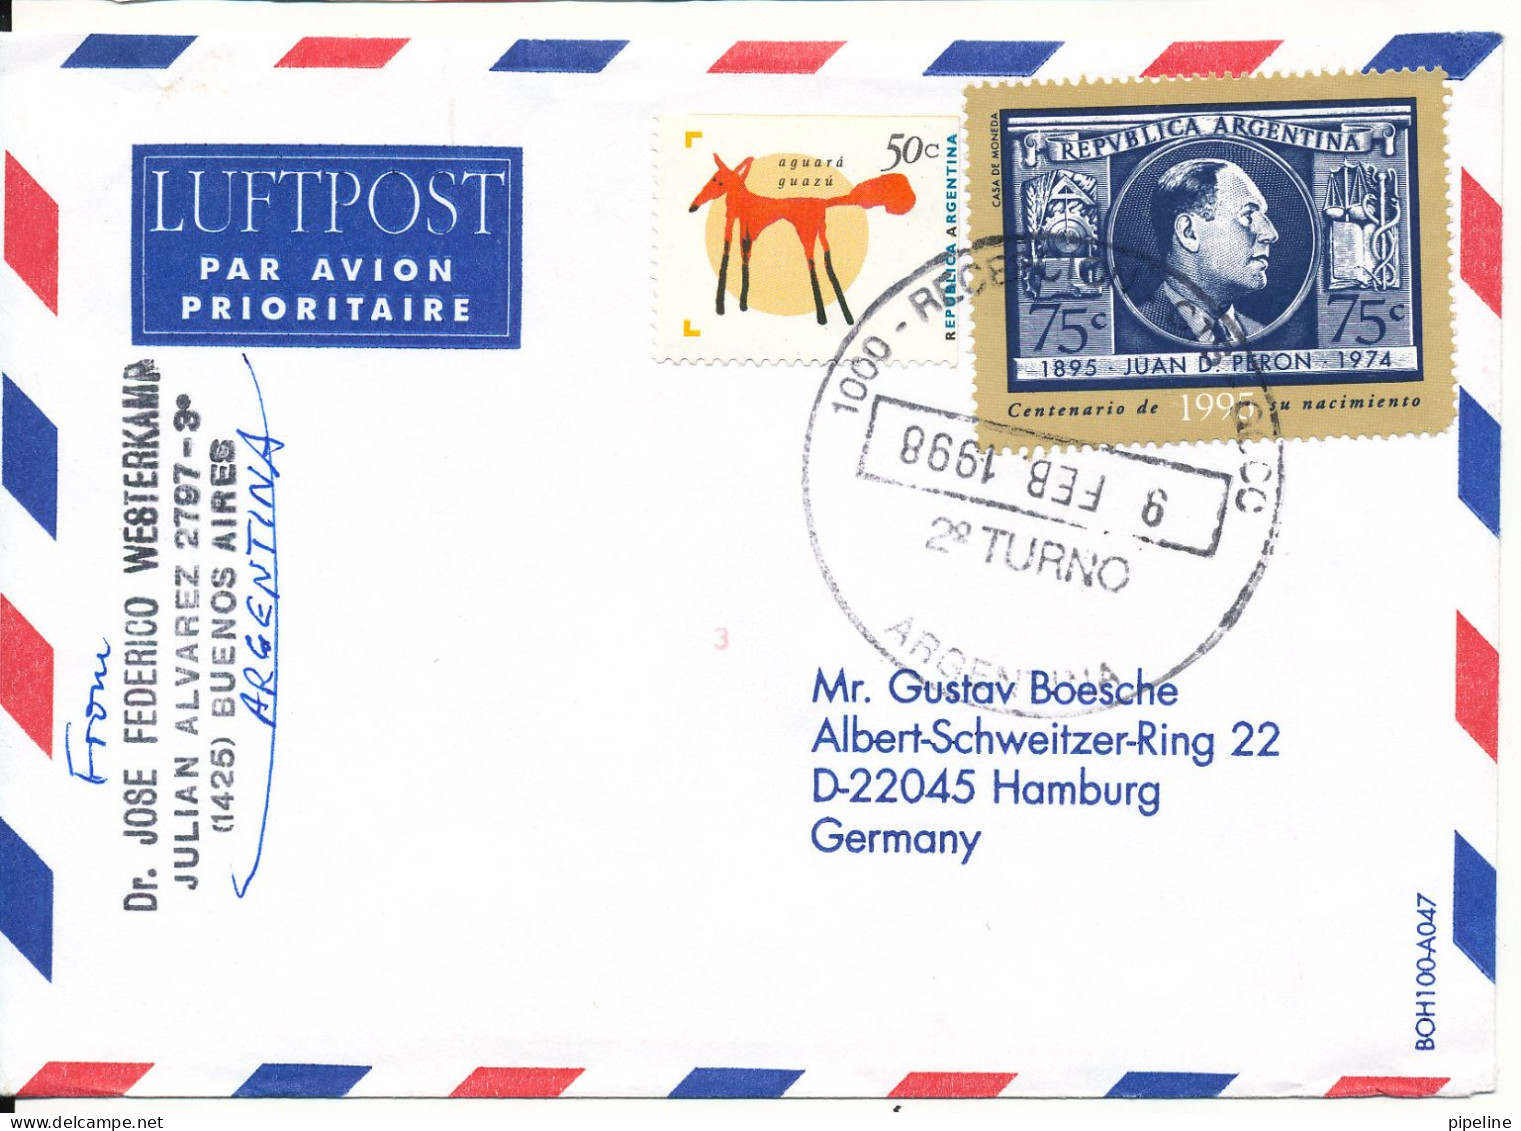 Argentina Air Mail Cover Sent To Germany 9-2-1998 - Luftpost